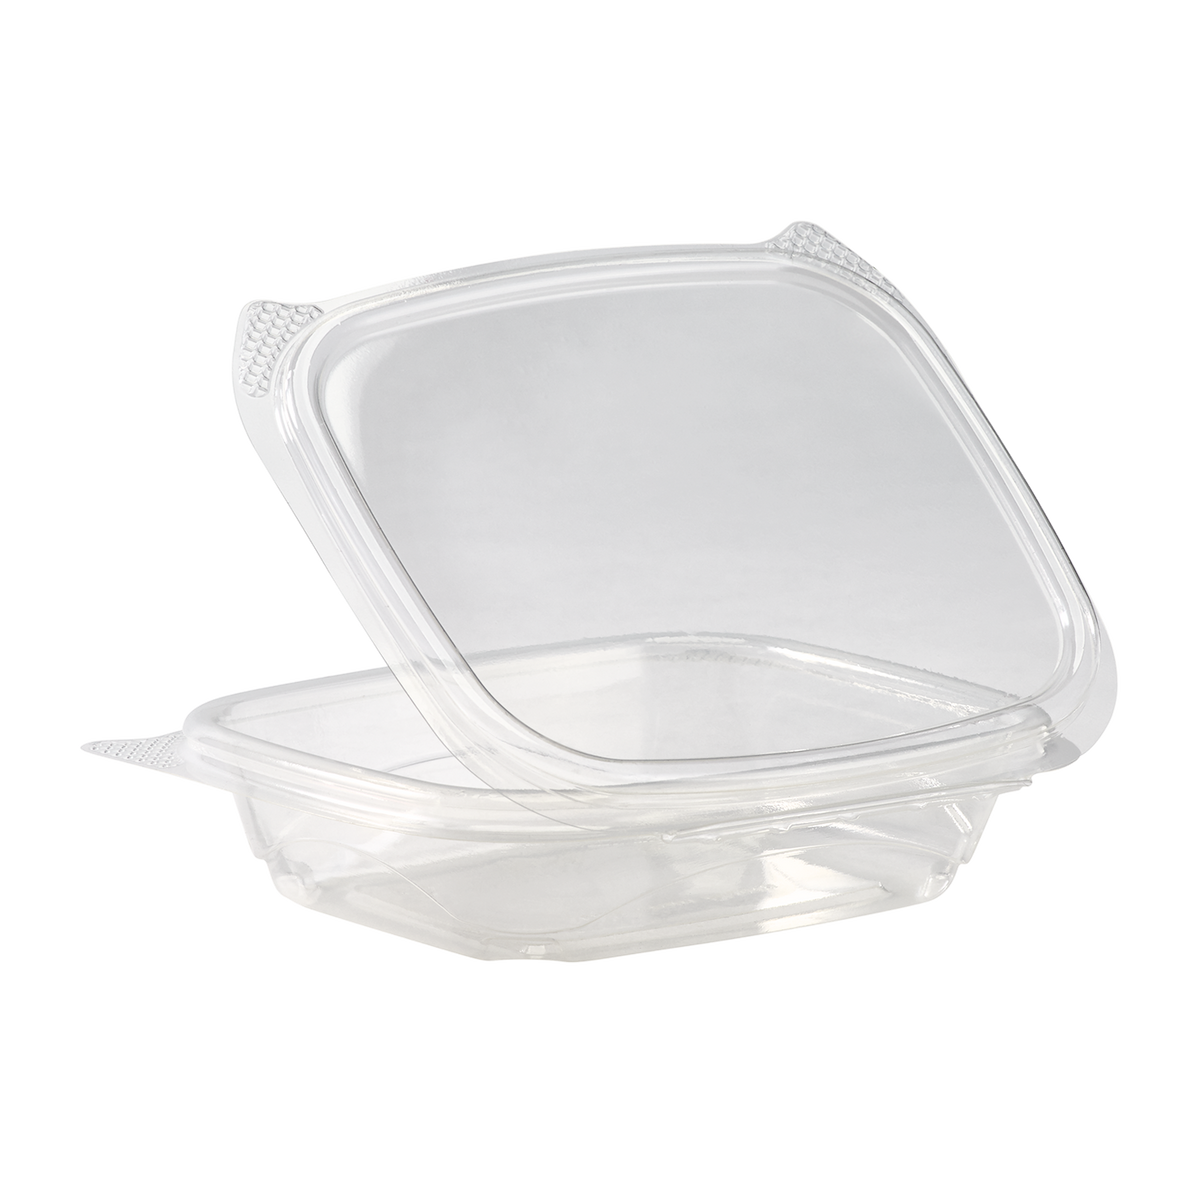 7''x7'' Hinged Containers - Medium Clamshell Takeout Boxes - Karat PP  Plastic - 250 count